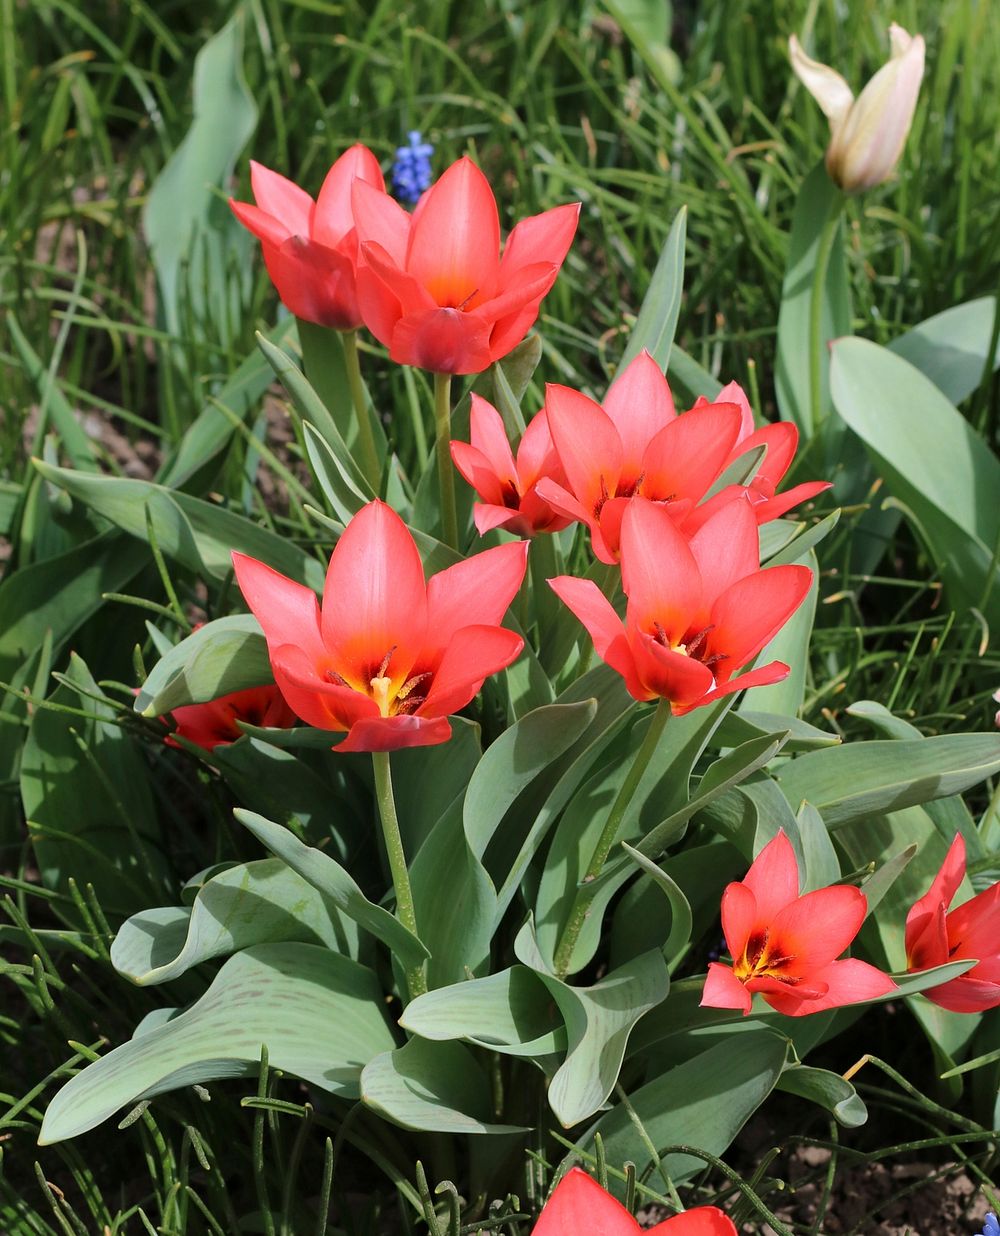 Cultivated red tulips in Vinnytsia, Ukraine. Original public domain image from Wikimedia Commons